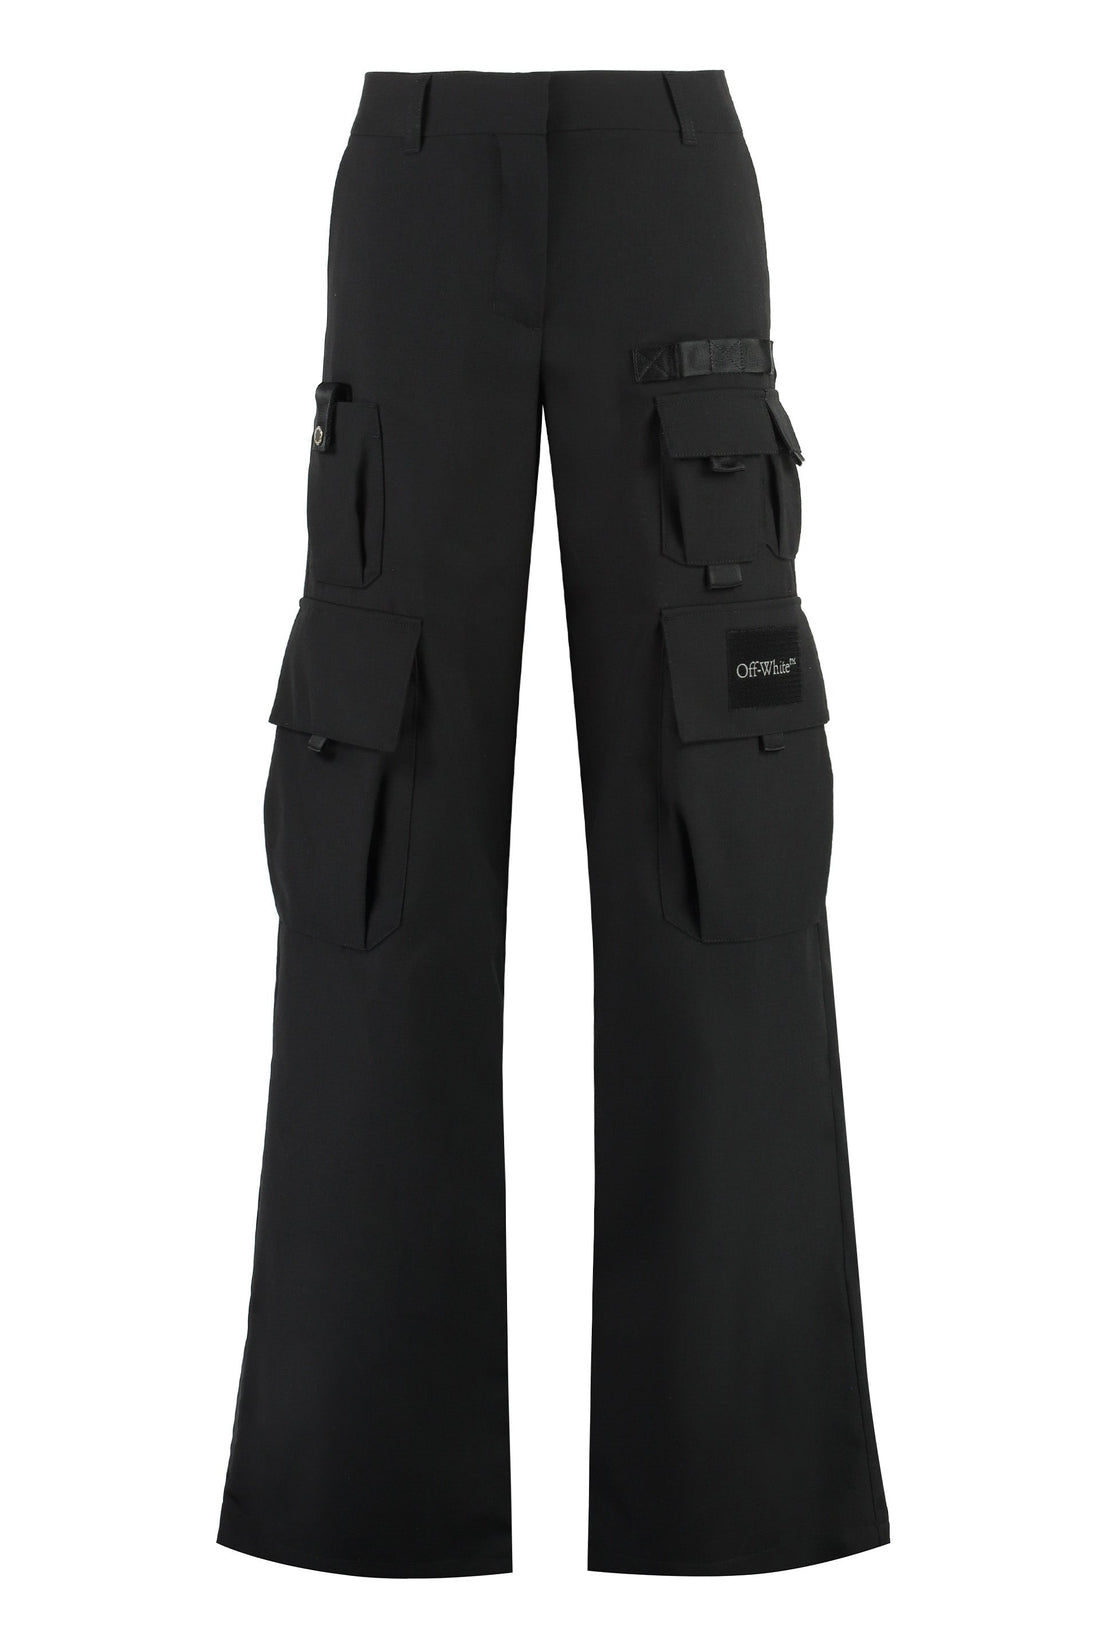 Off-White-OUTLET-SALE-Wool cargo trousers-ARCHIVIST